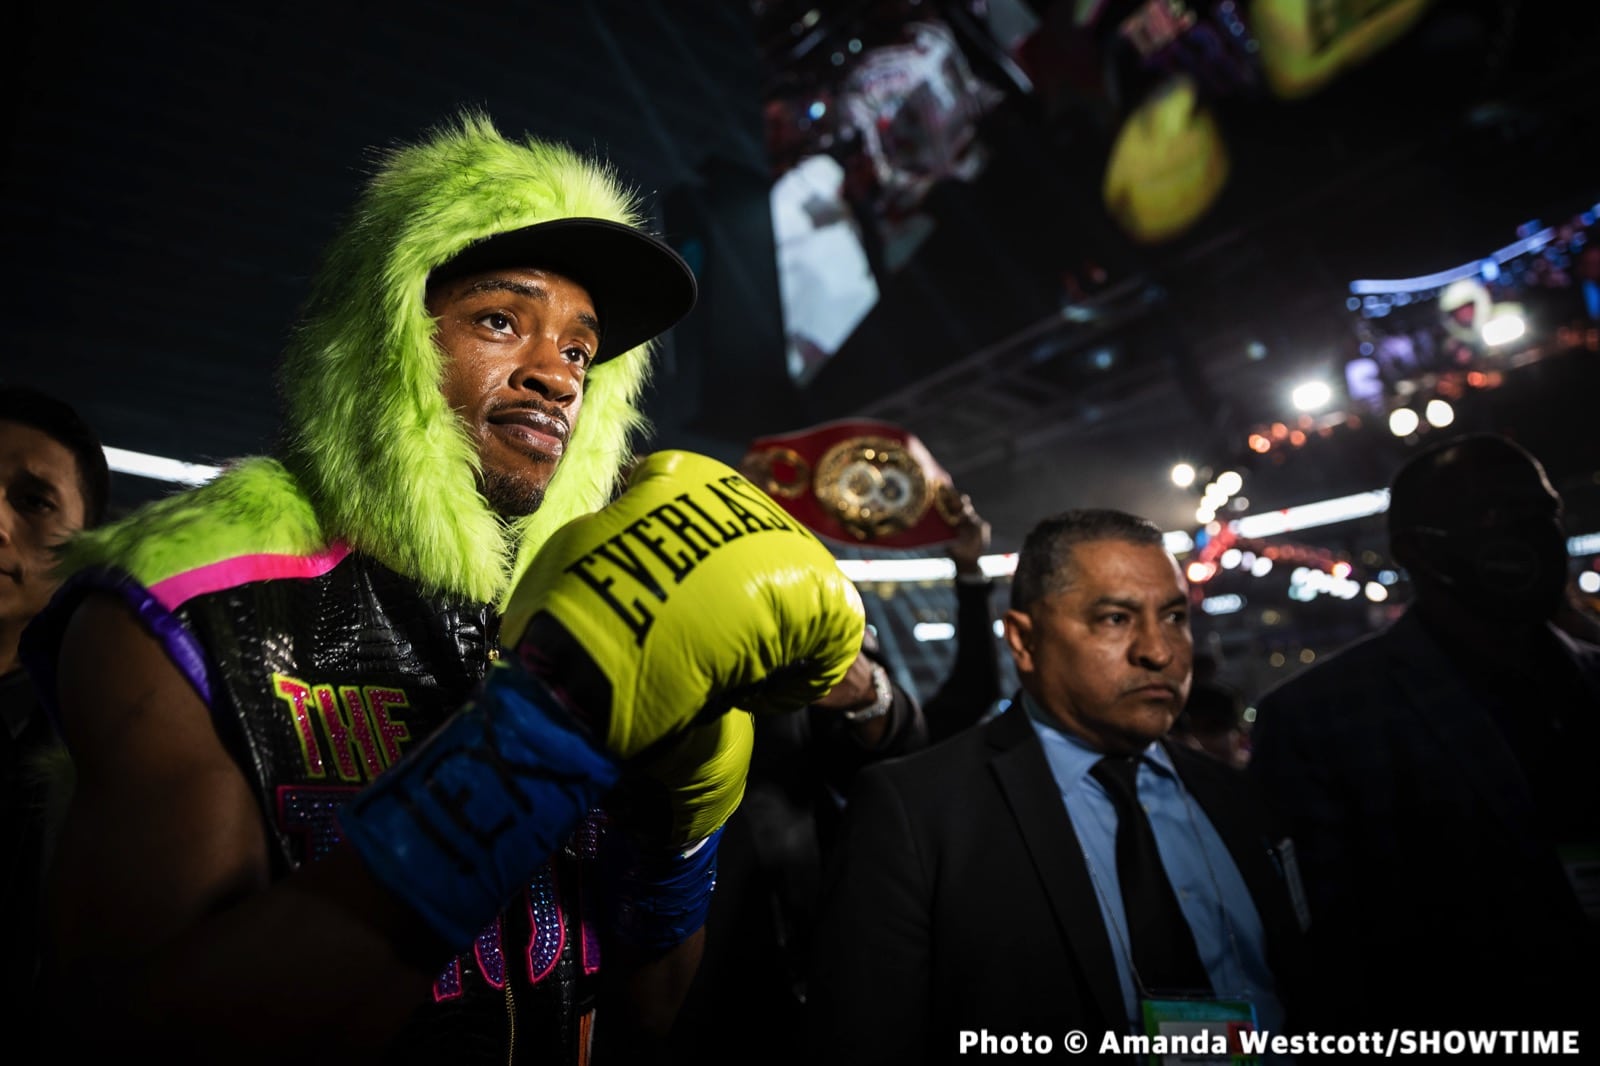 Image: Errol Spence on Terence Crawford fight: "S**t is happening next, all you need to know!"